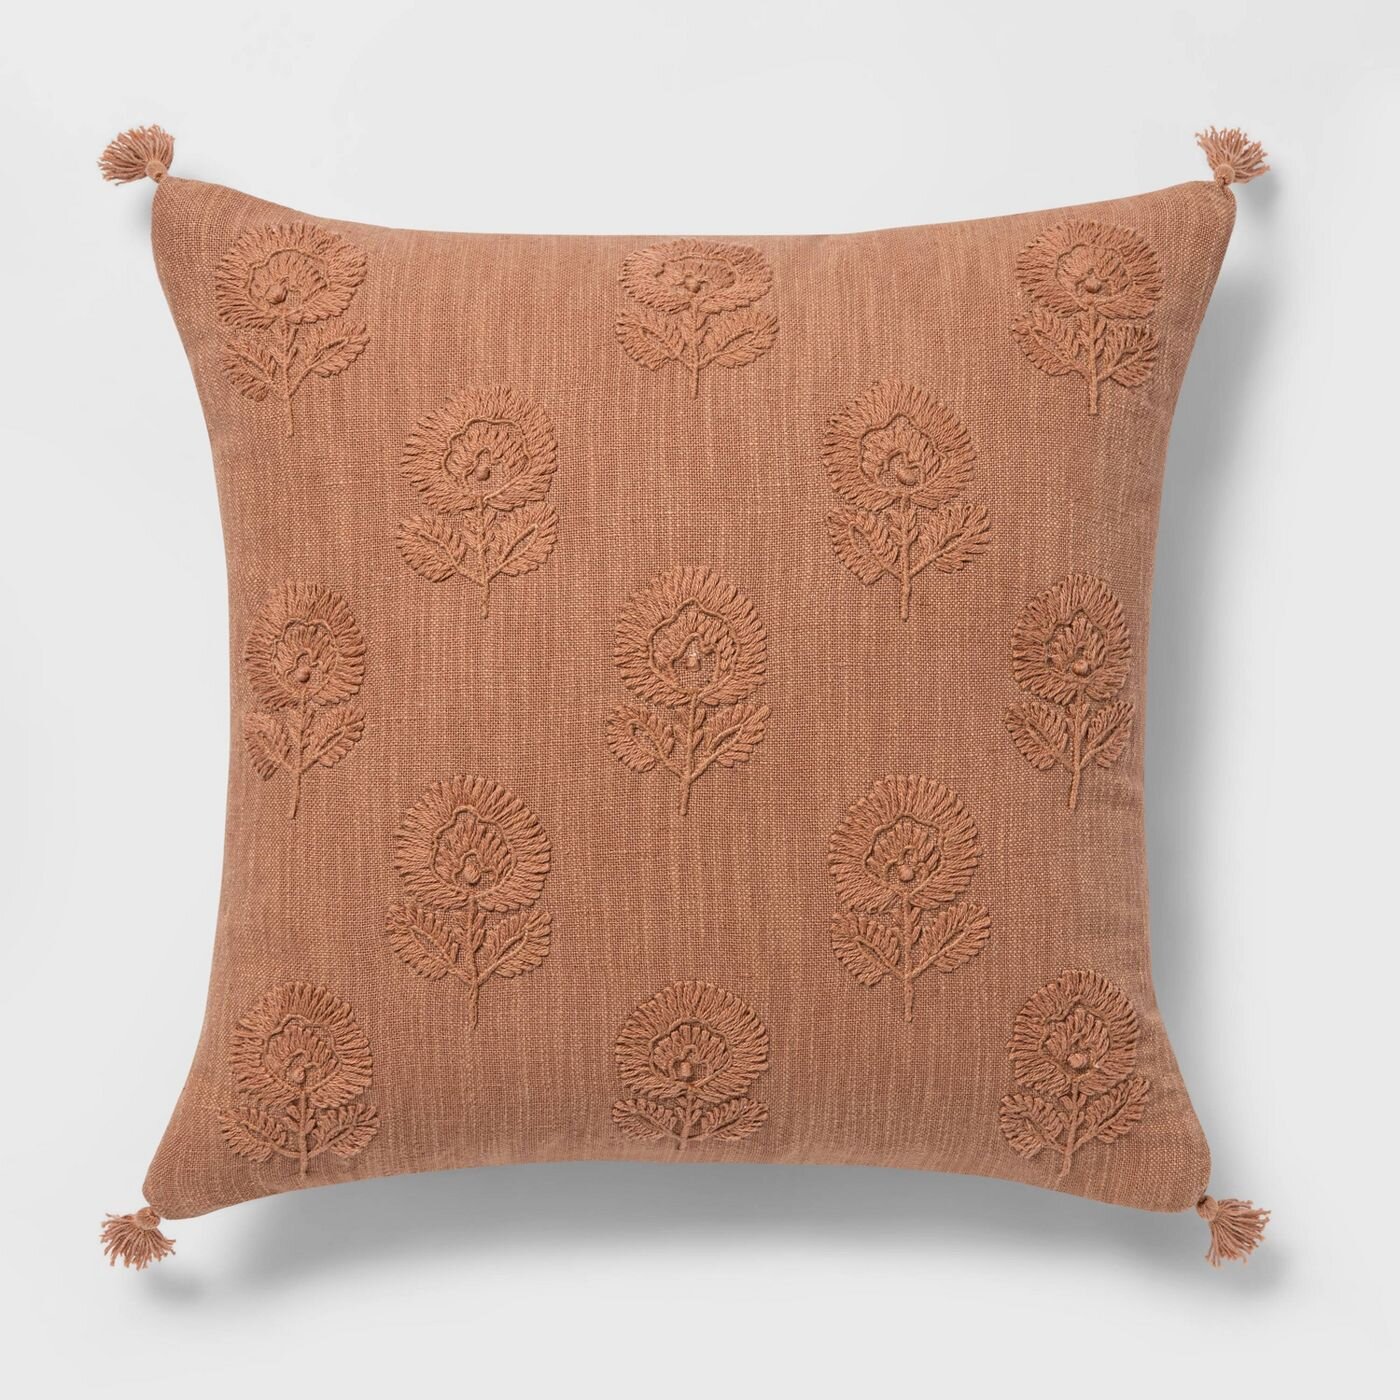 Embroidered Floral Throw Pillow with Tassels - Threshold™